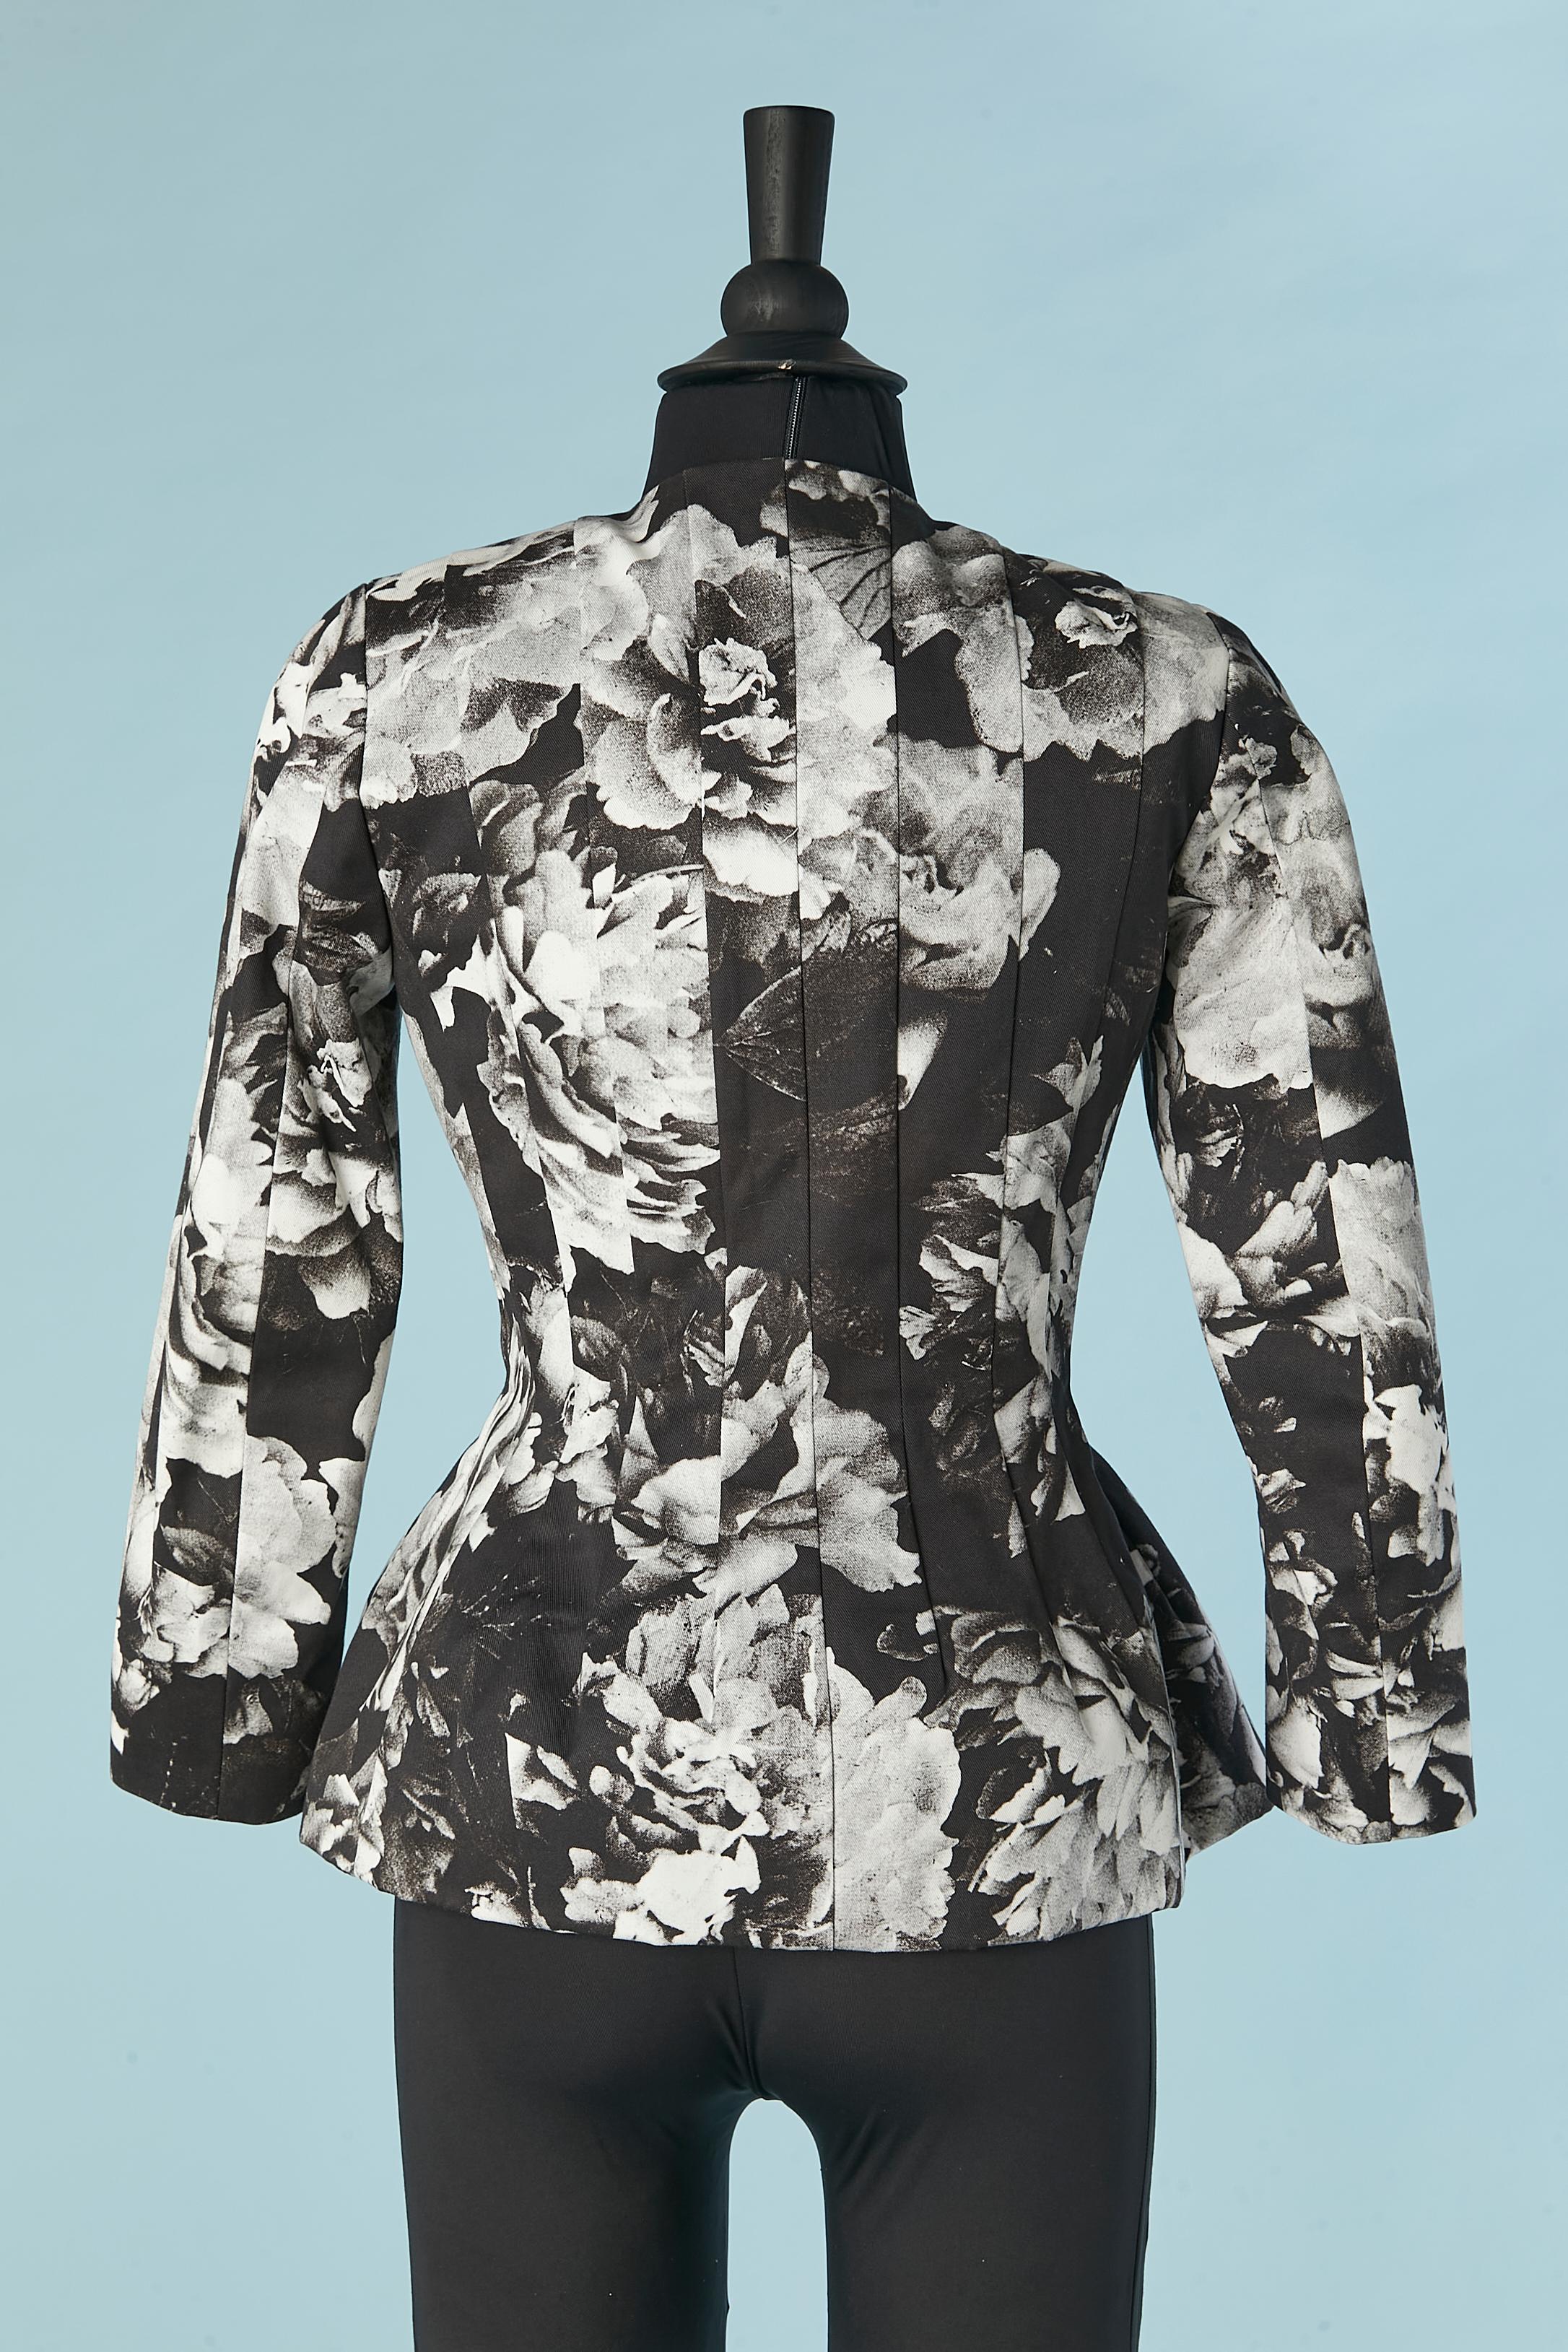 Black and white flowers printed cotton edge to edge  jacket Dries Van Noten  For Sale 1